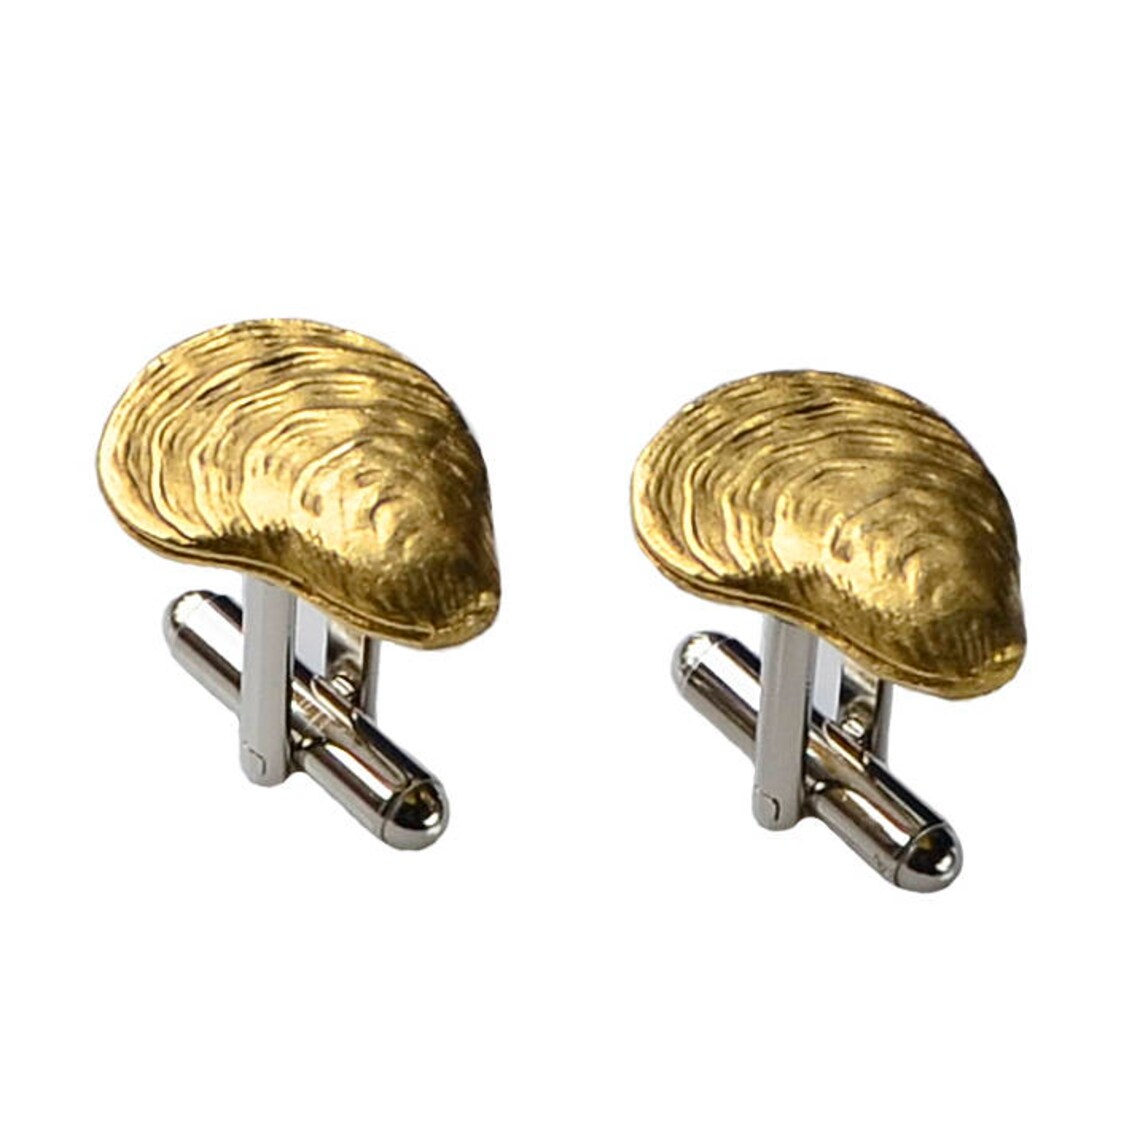 Oysters! Oysters! Oysters! | Cufflinks, Lapel Pin, Tuxedo Studs | Solid Pewter and Gold Plate | Manufactured in USA